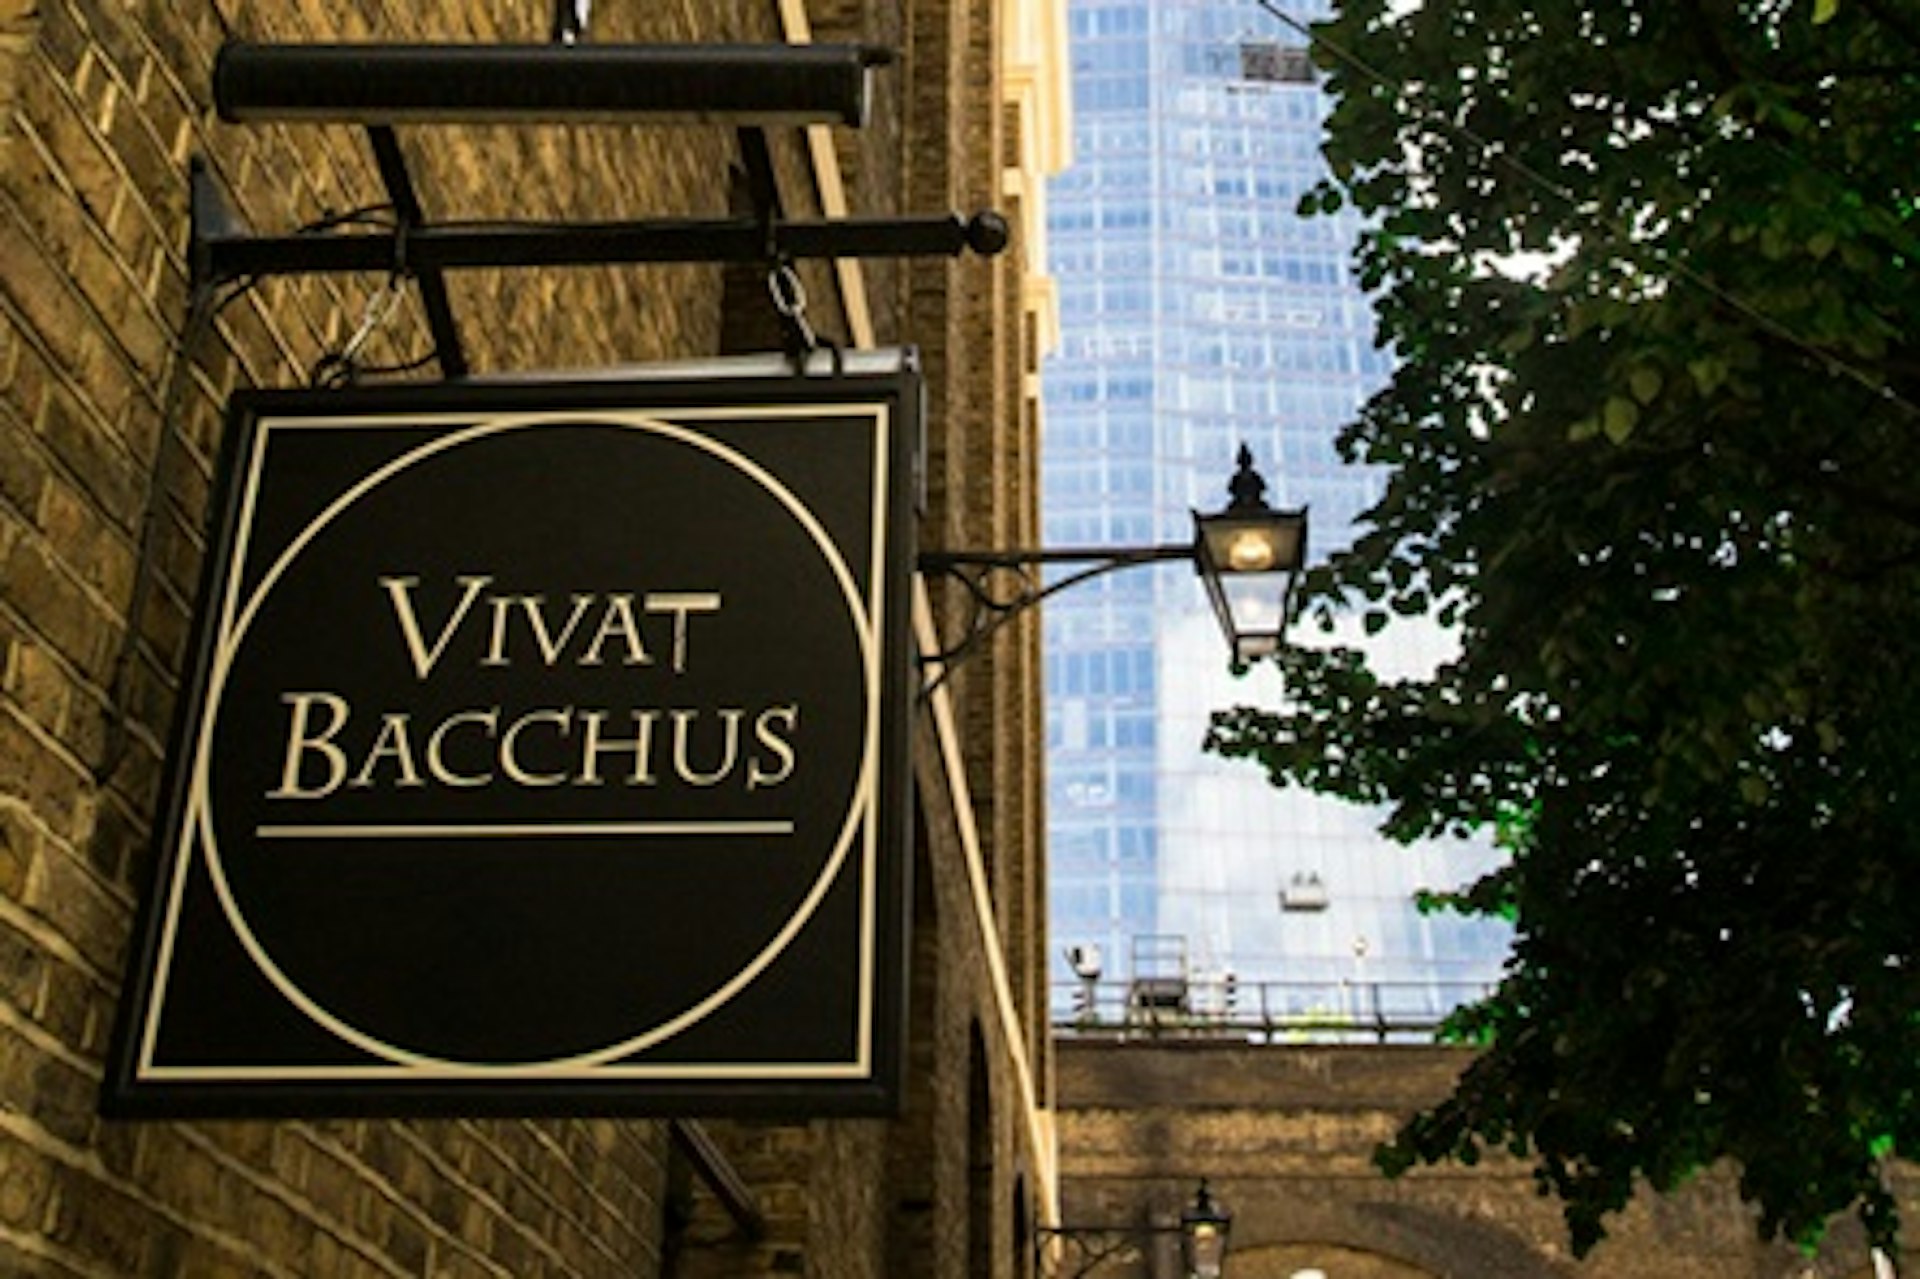 Two Course Dinner and Wine Flight for Two at London's Vivat Bacchus 3